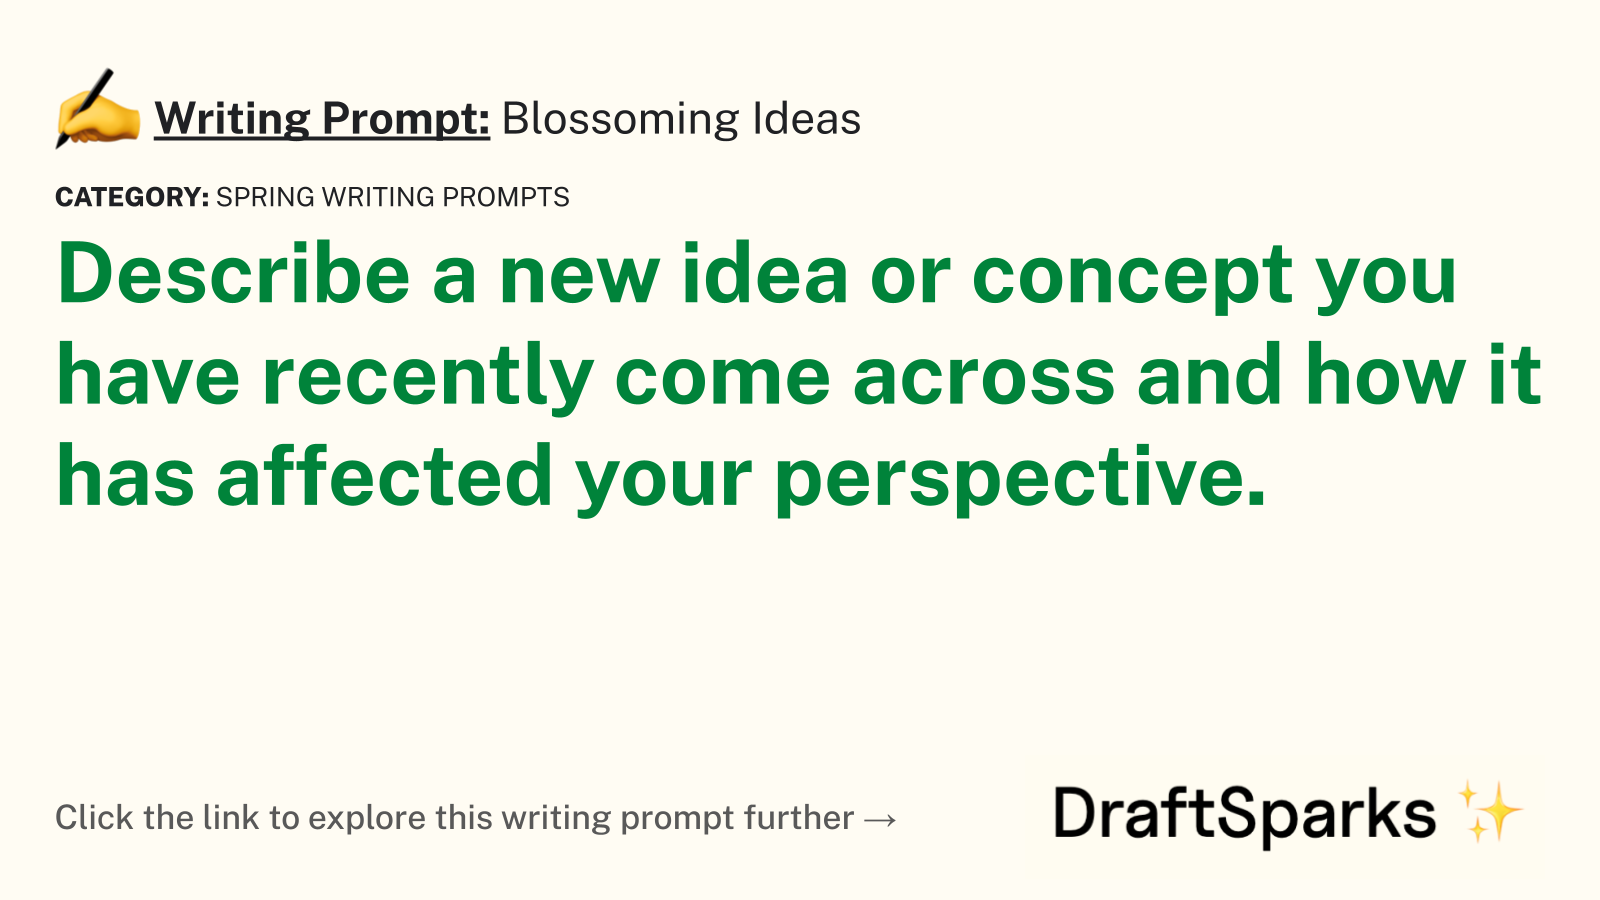 Blossoming Ideas